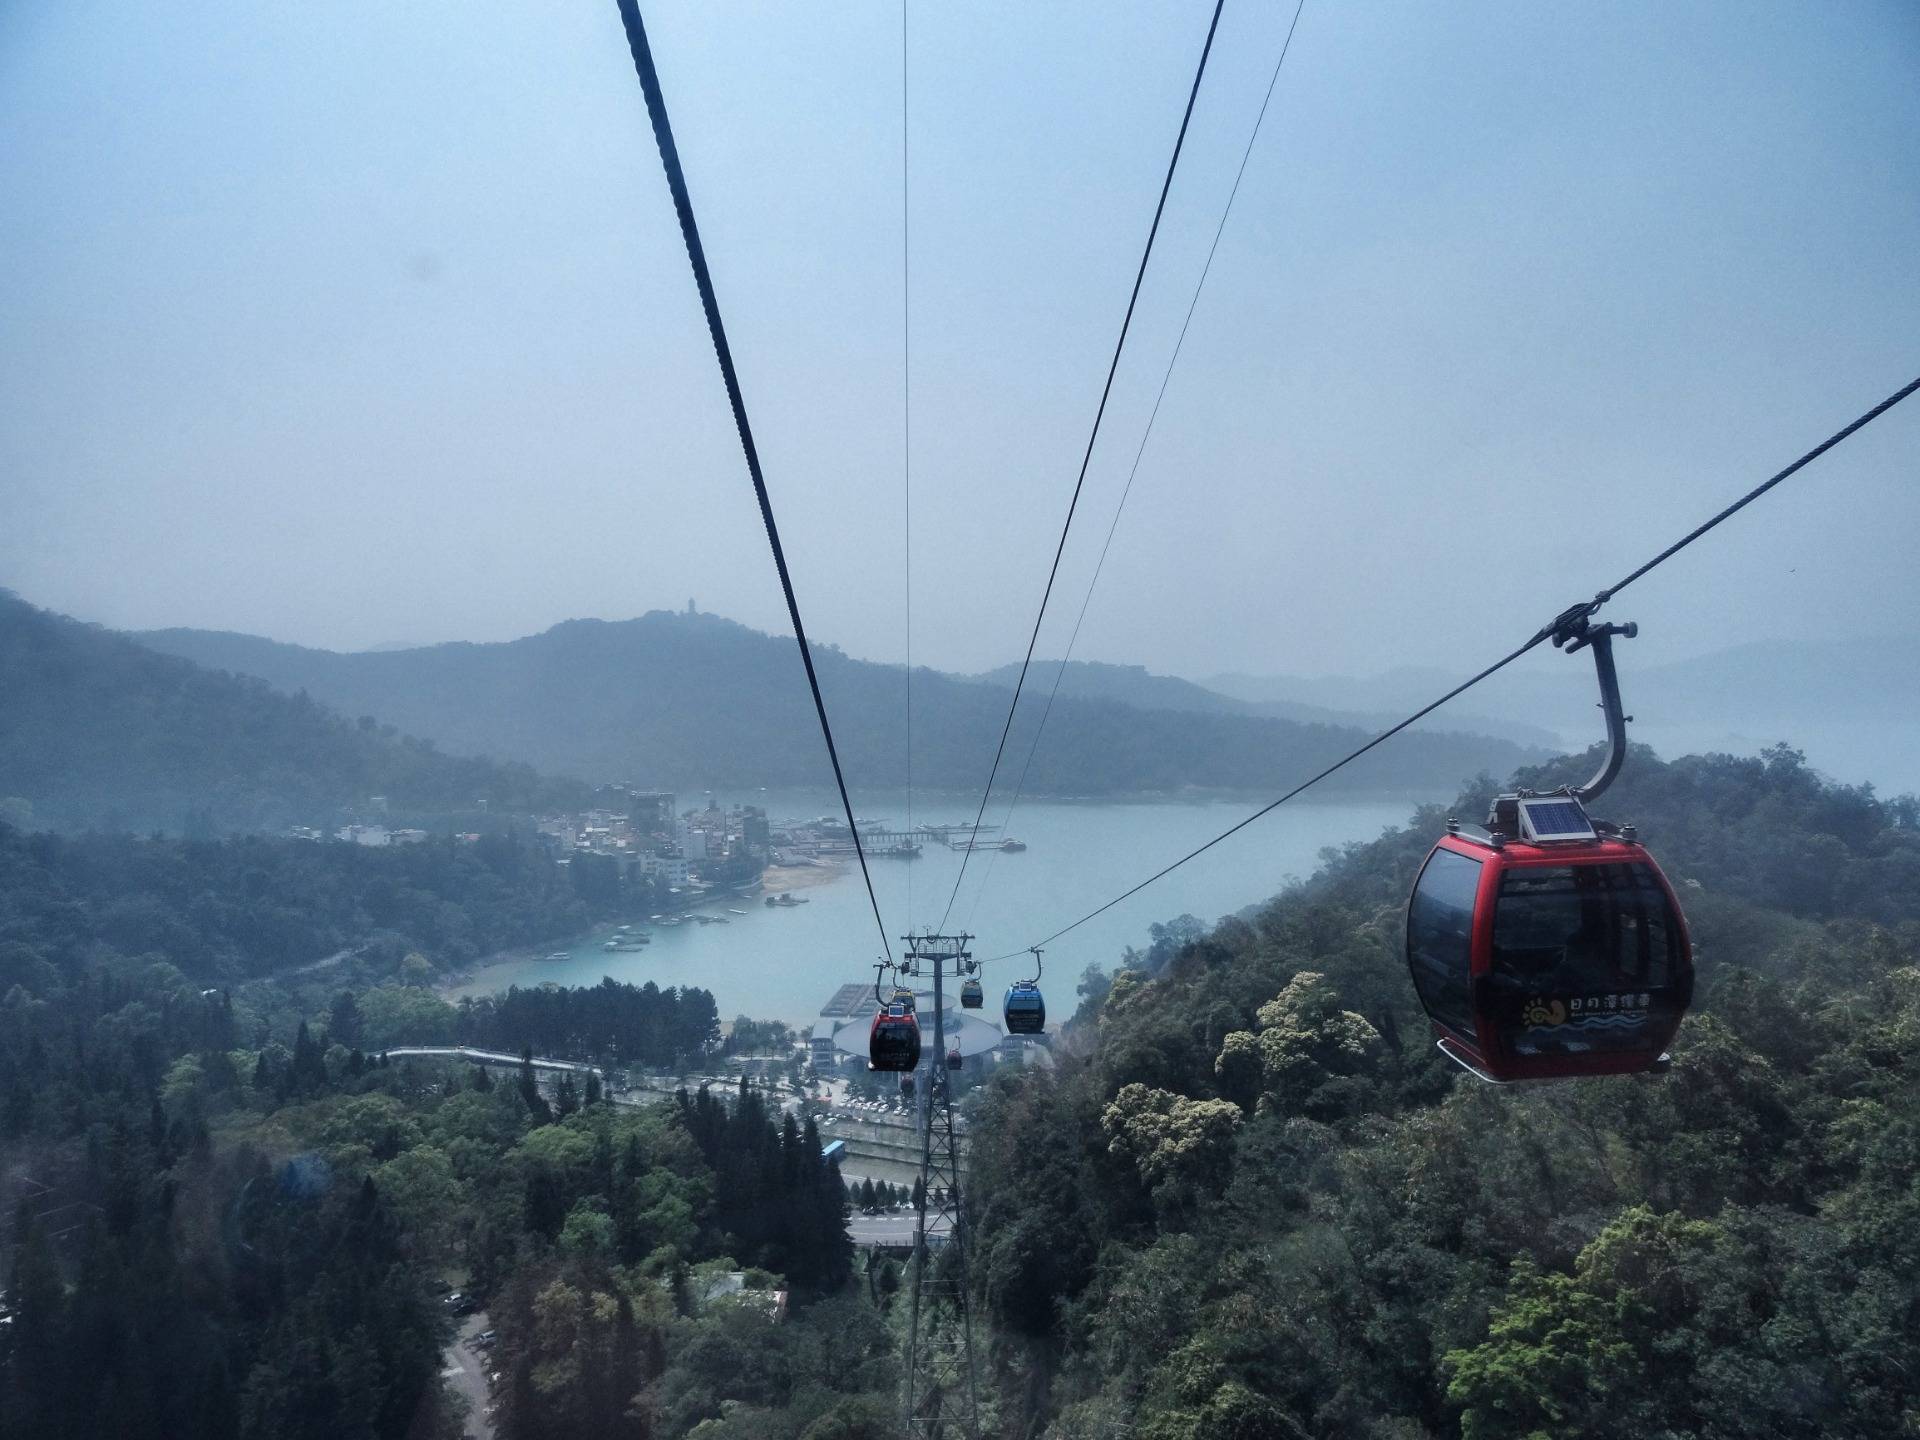 Sun Moon Lake: In the clouds over the water